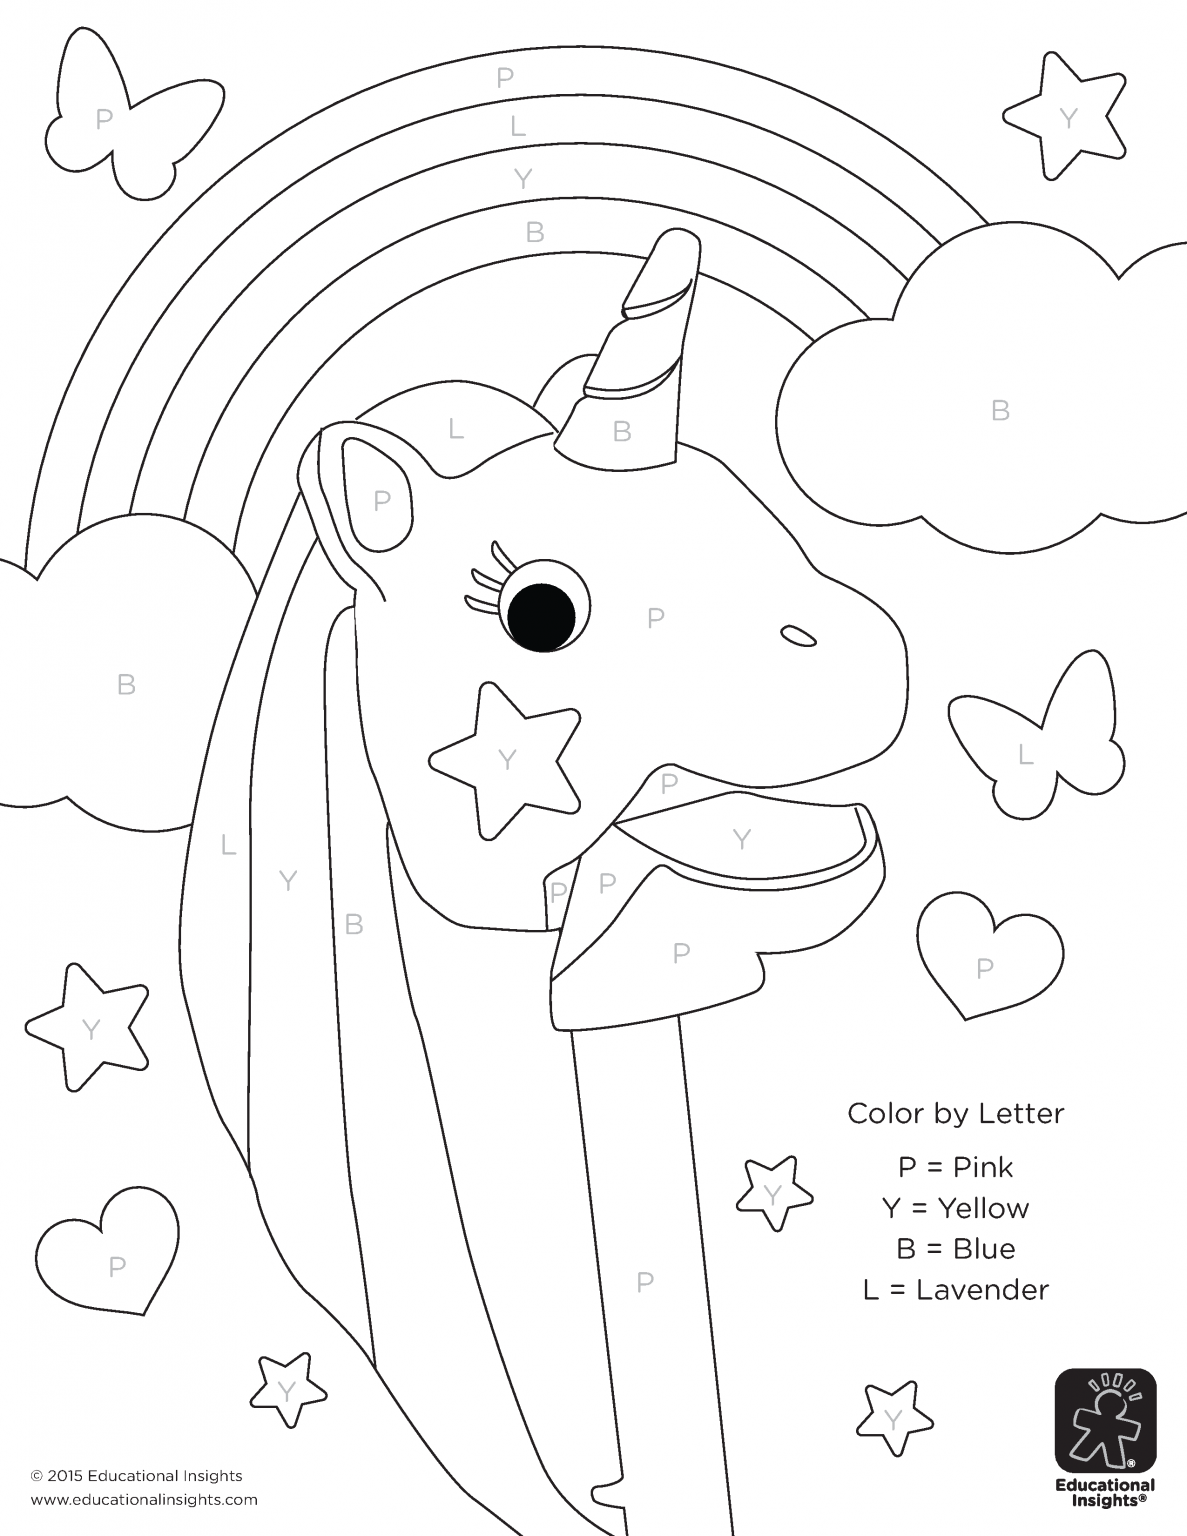 unicorn-color-by-number-free-printable-coloring-pages-beautiful-unicorn-color-by-number